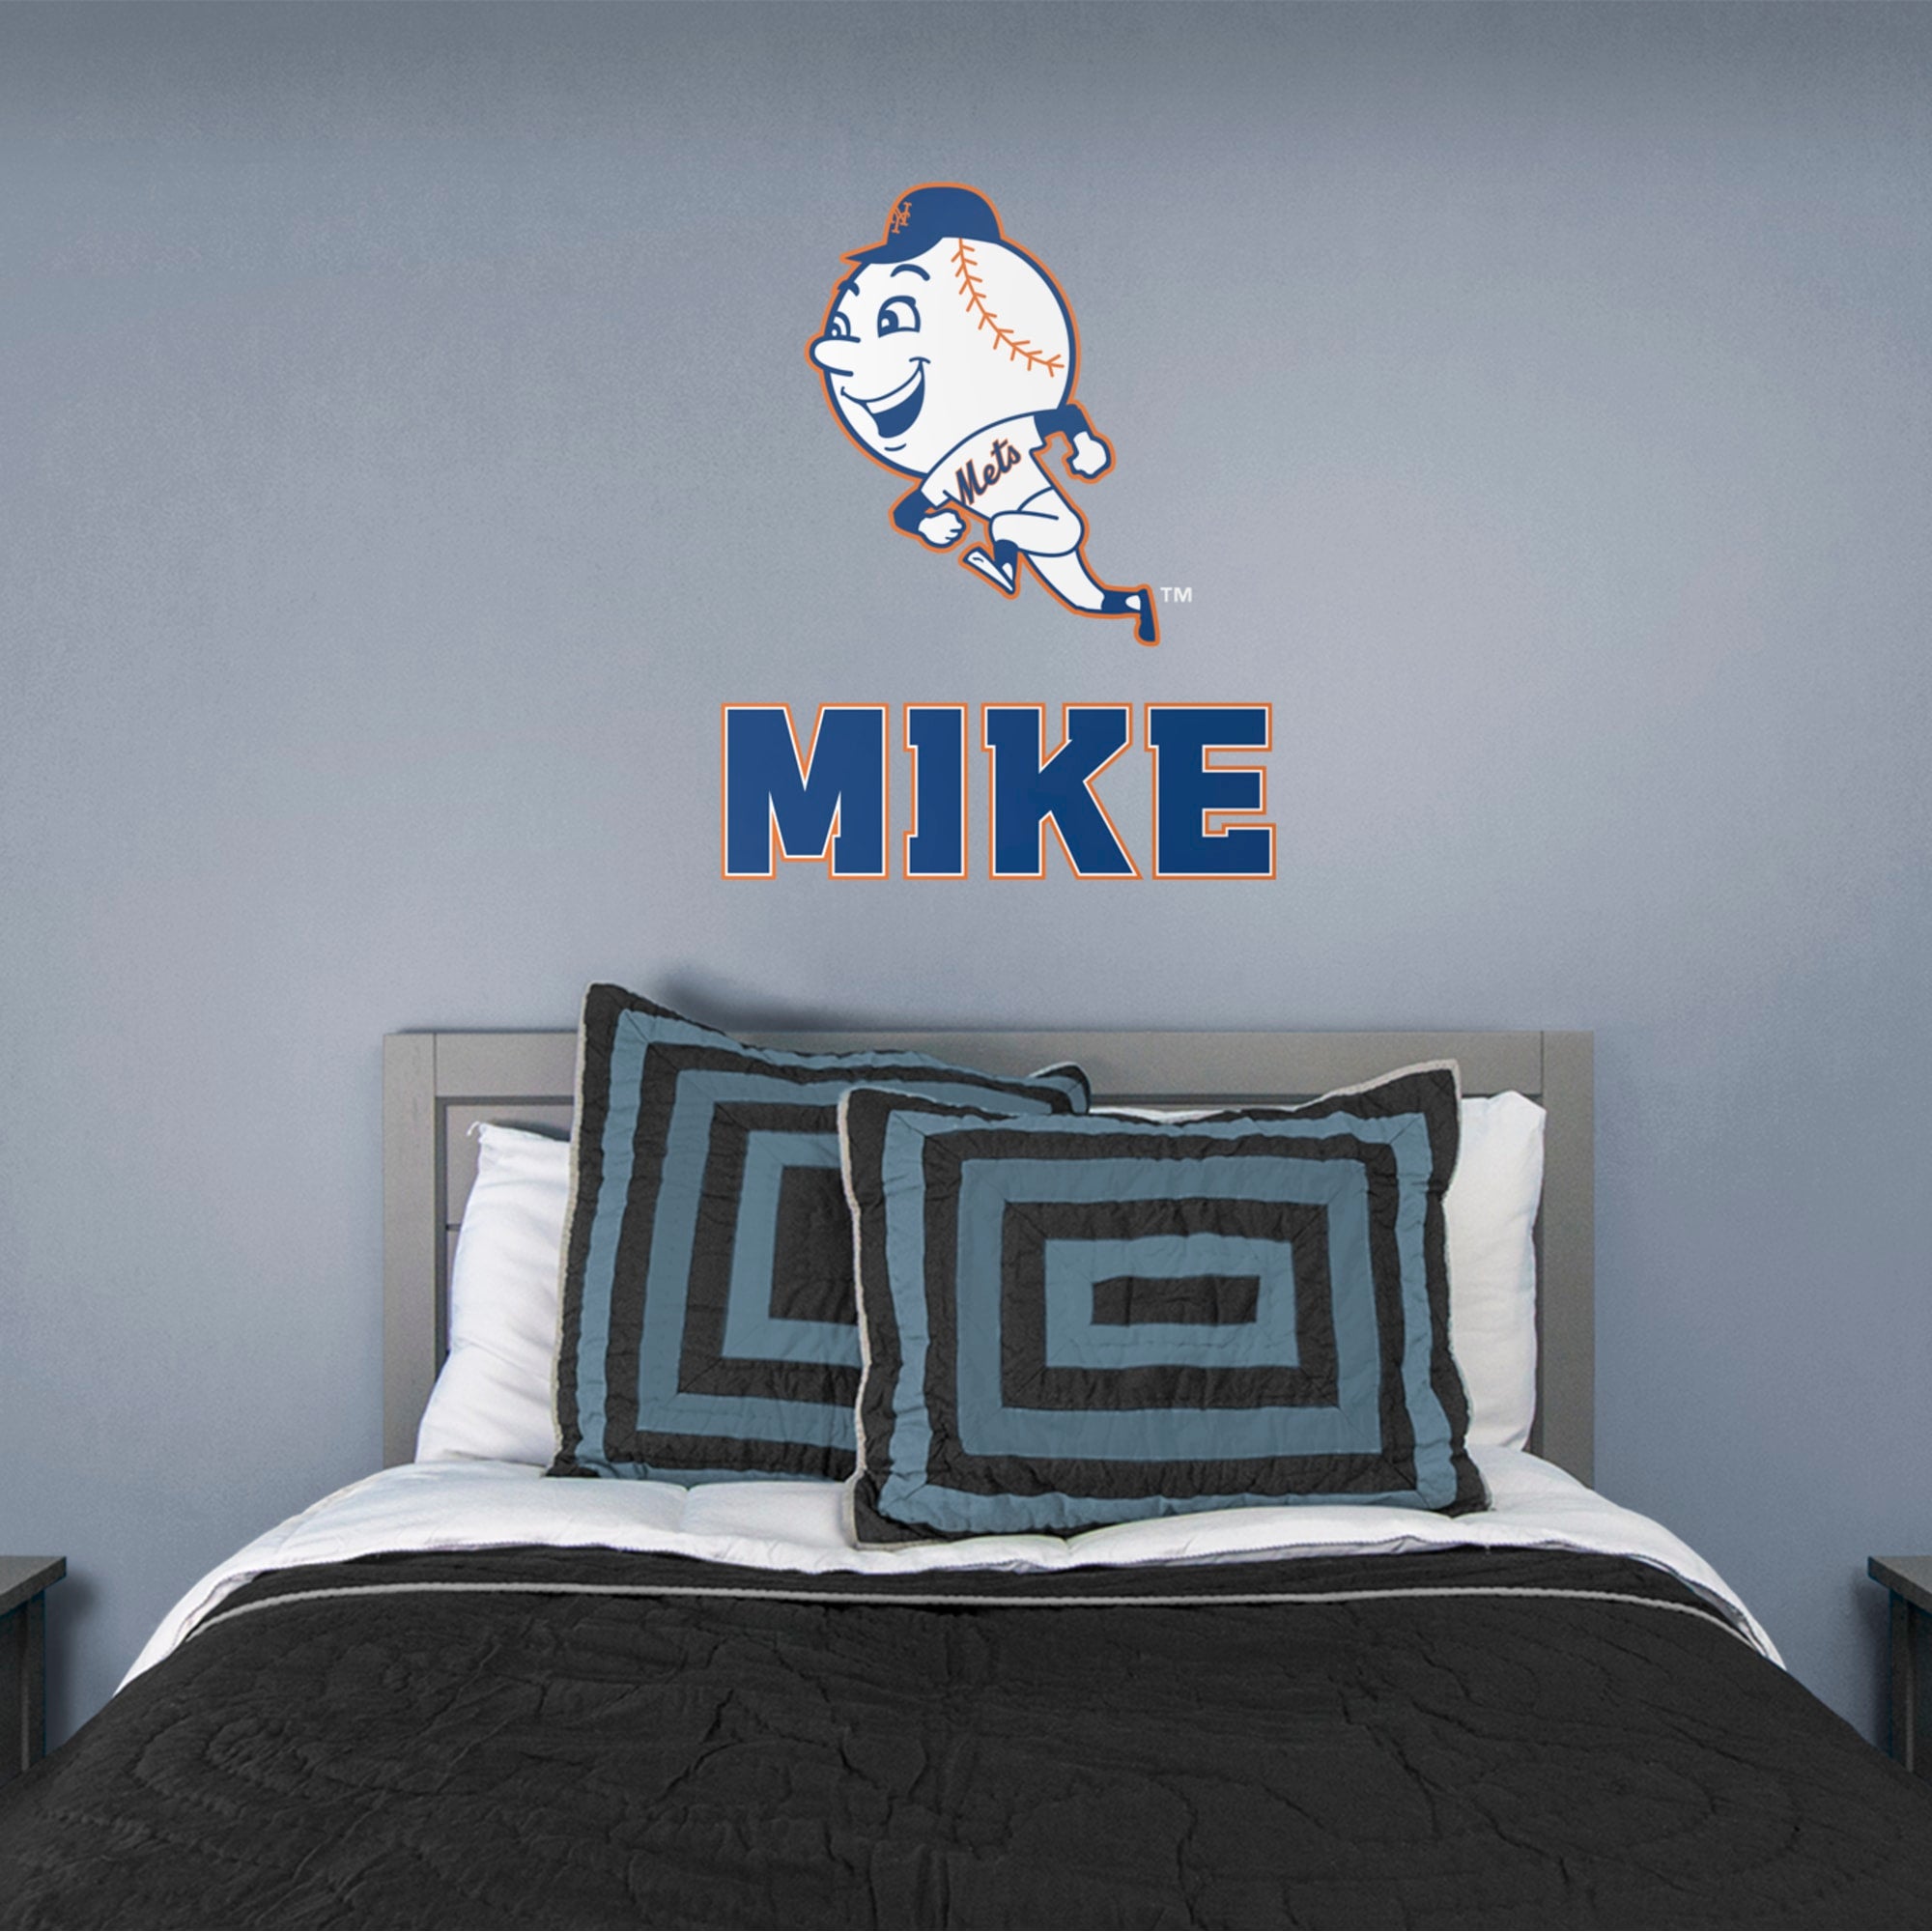 New York Mets: Mr. Met Stacked Personalized Name - Officially Licensed MLB Transfer Decal in Blue (52"W x 39.5"H) by Fathead | V